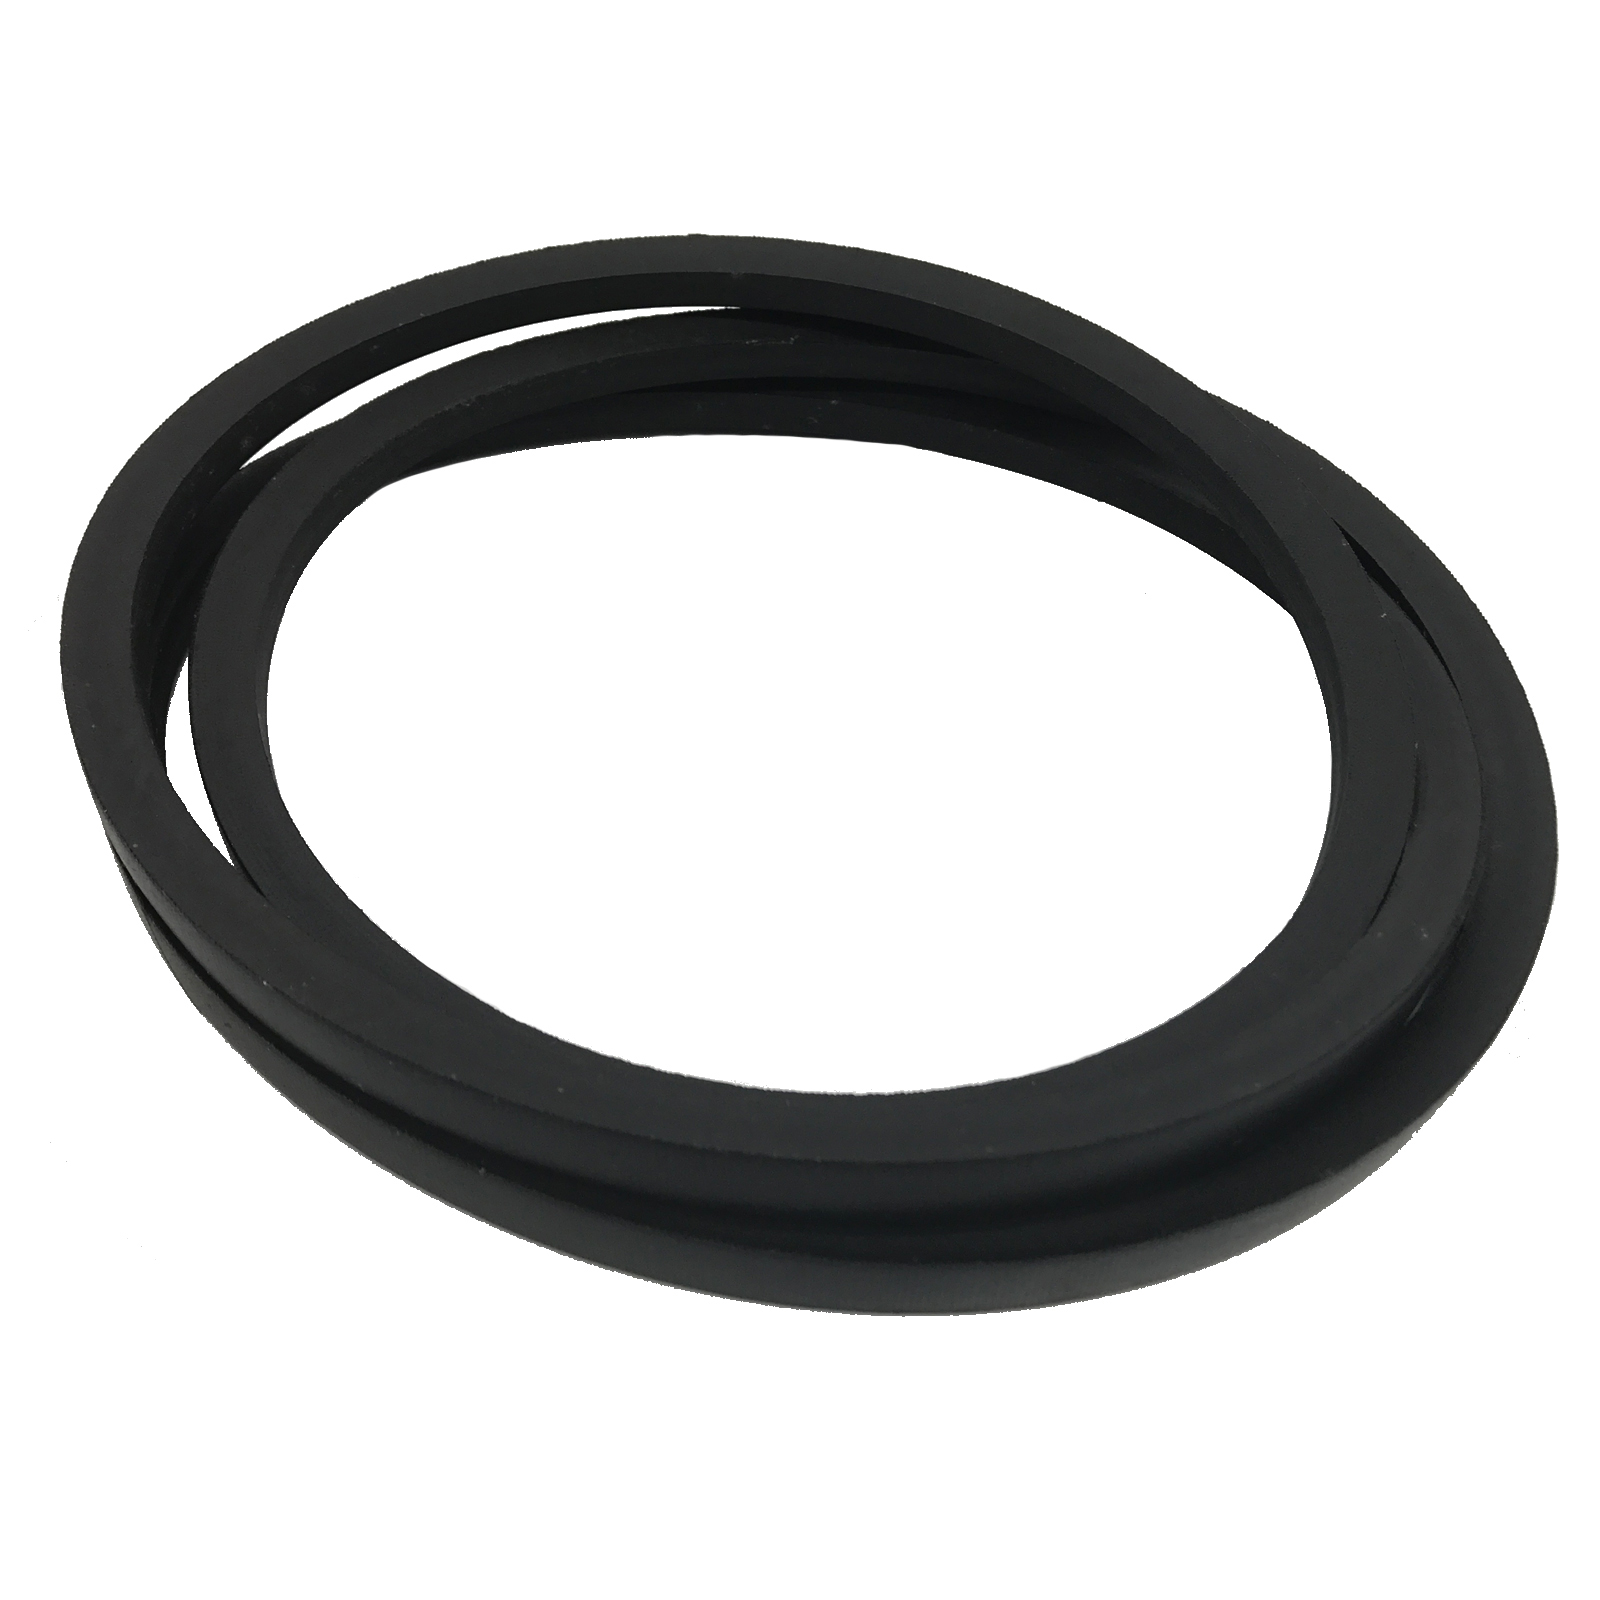 Replacement Mower Drive Belt for Murray 37X63 37X39 37X43 37X63MA 1/2" x 83"